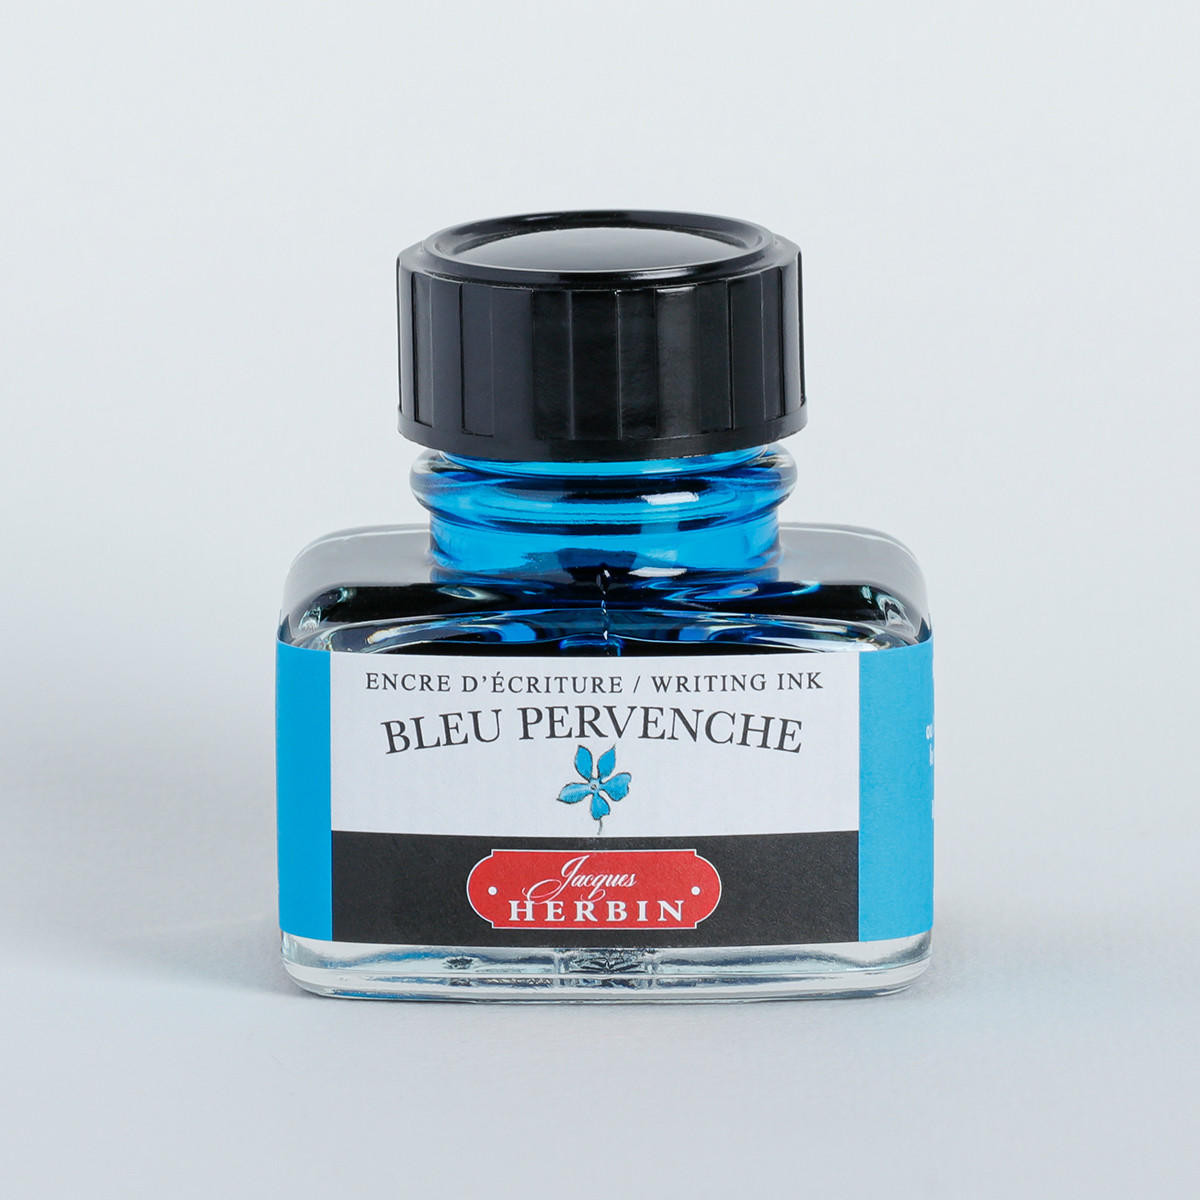 Herbin ’D’ Writing and Drawing Ink 30ml Bleu Pervenche